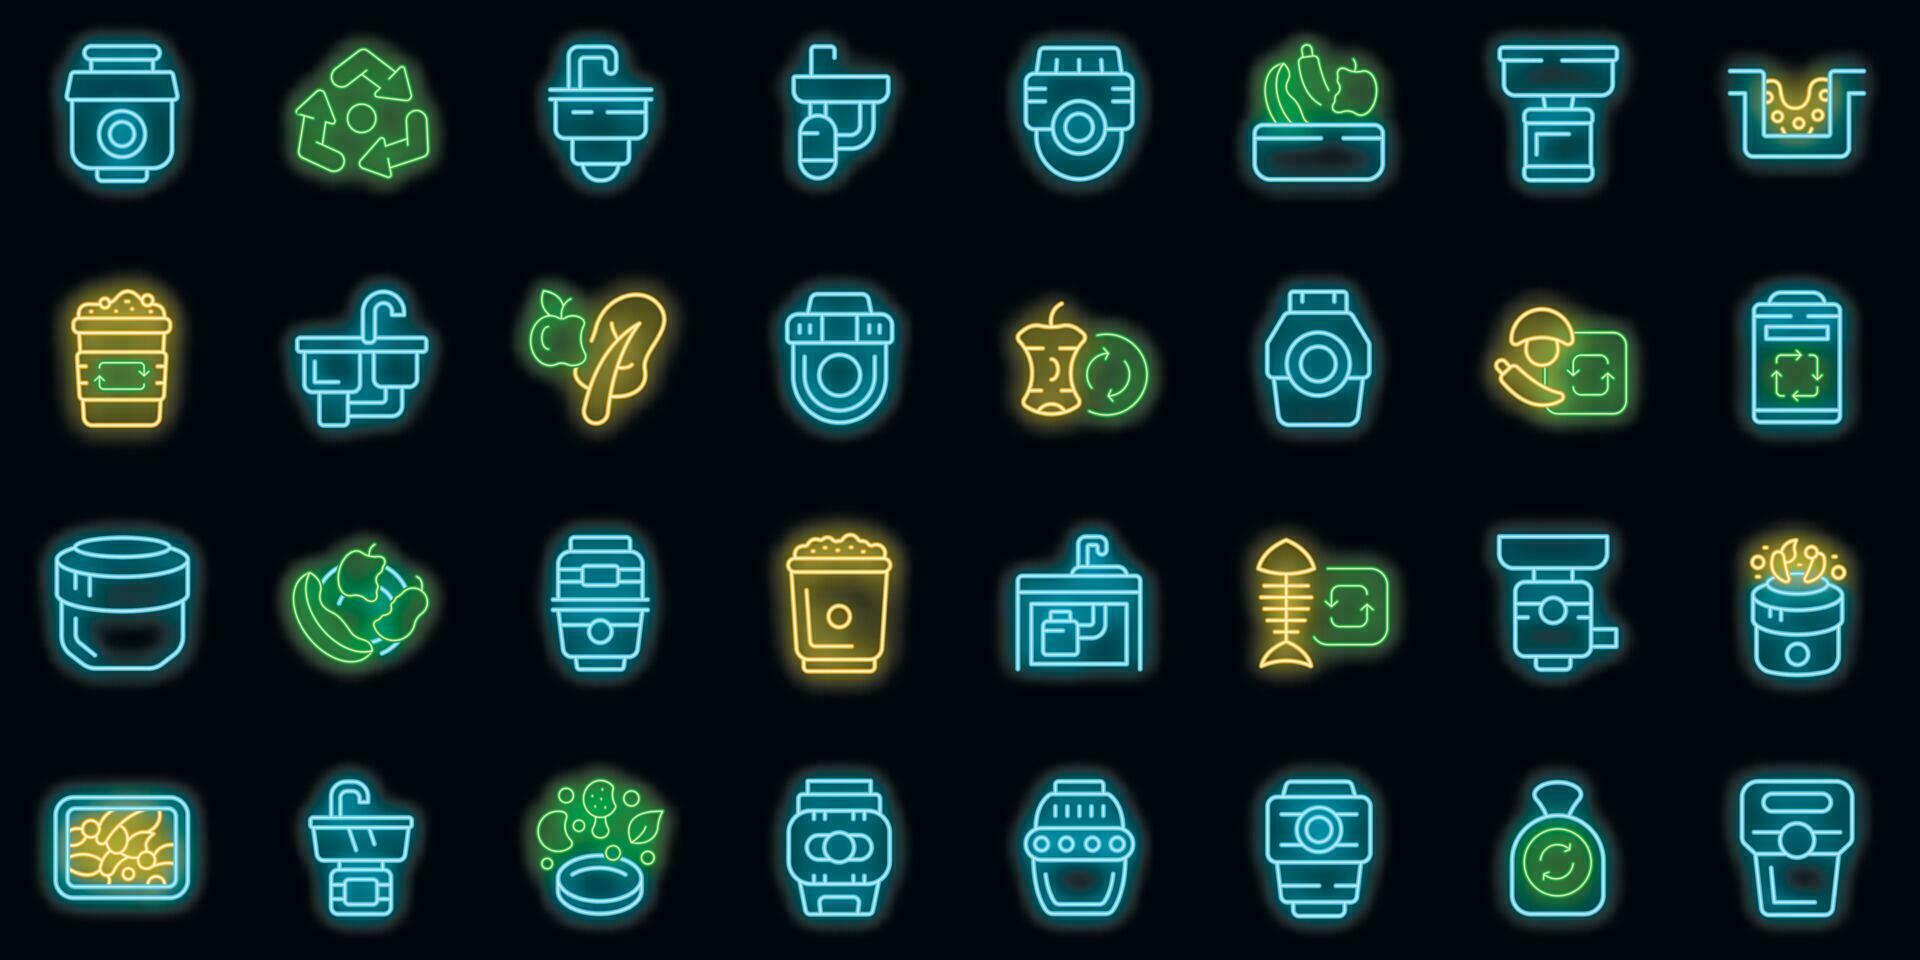 Food Waste Disposer icons set vector neon